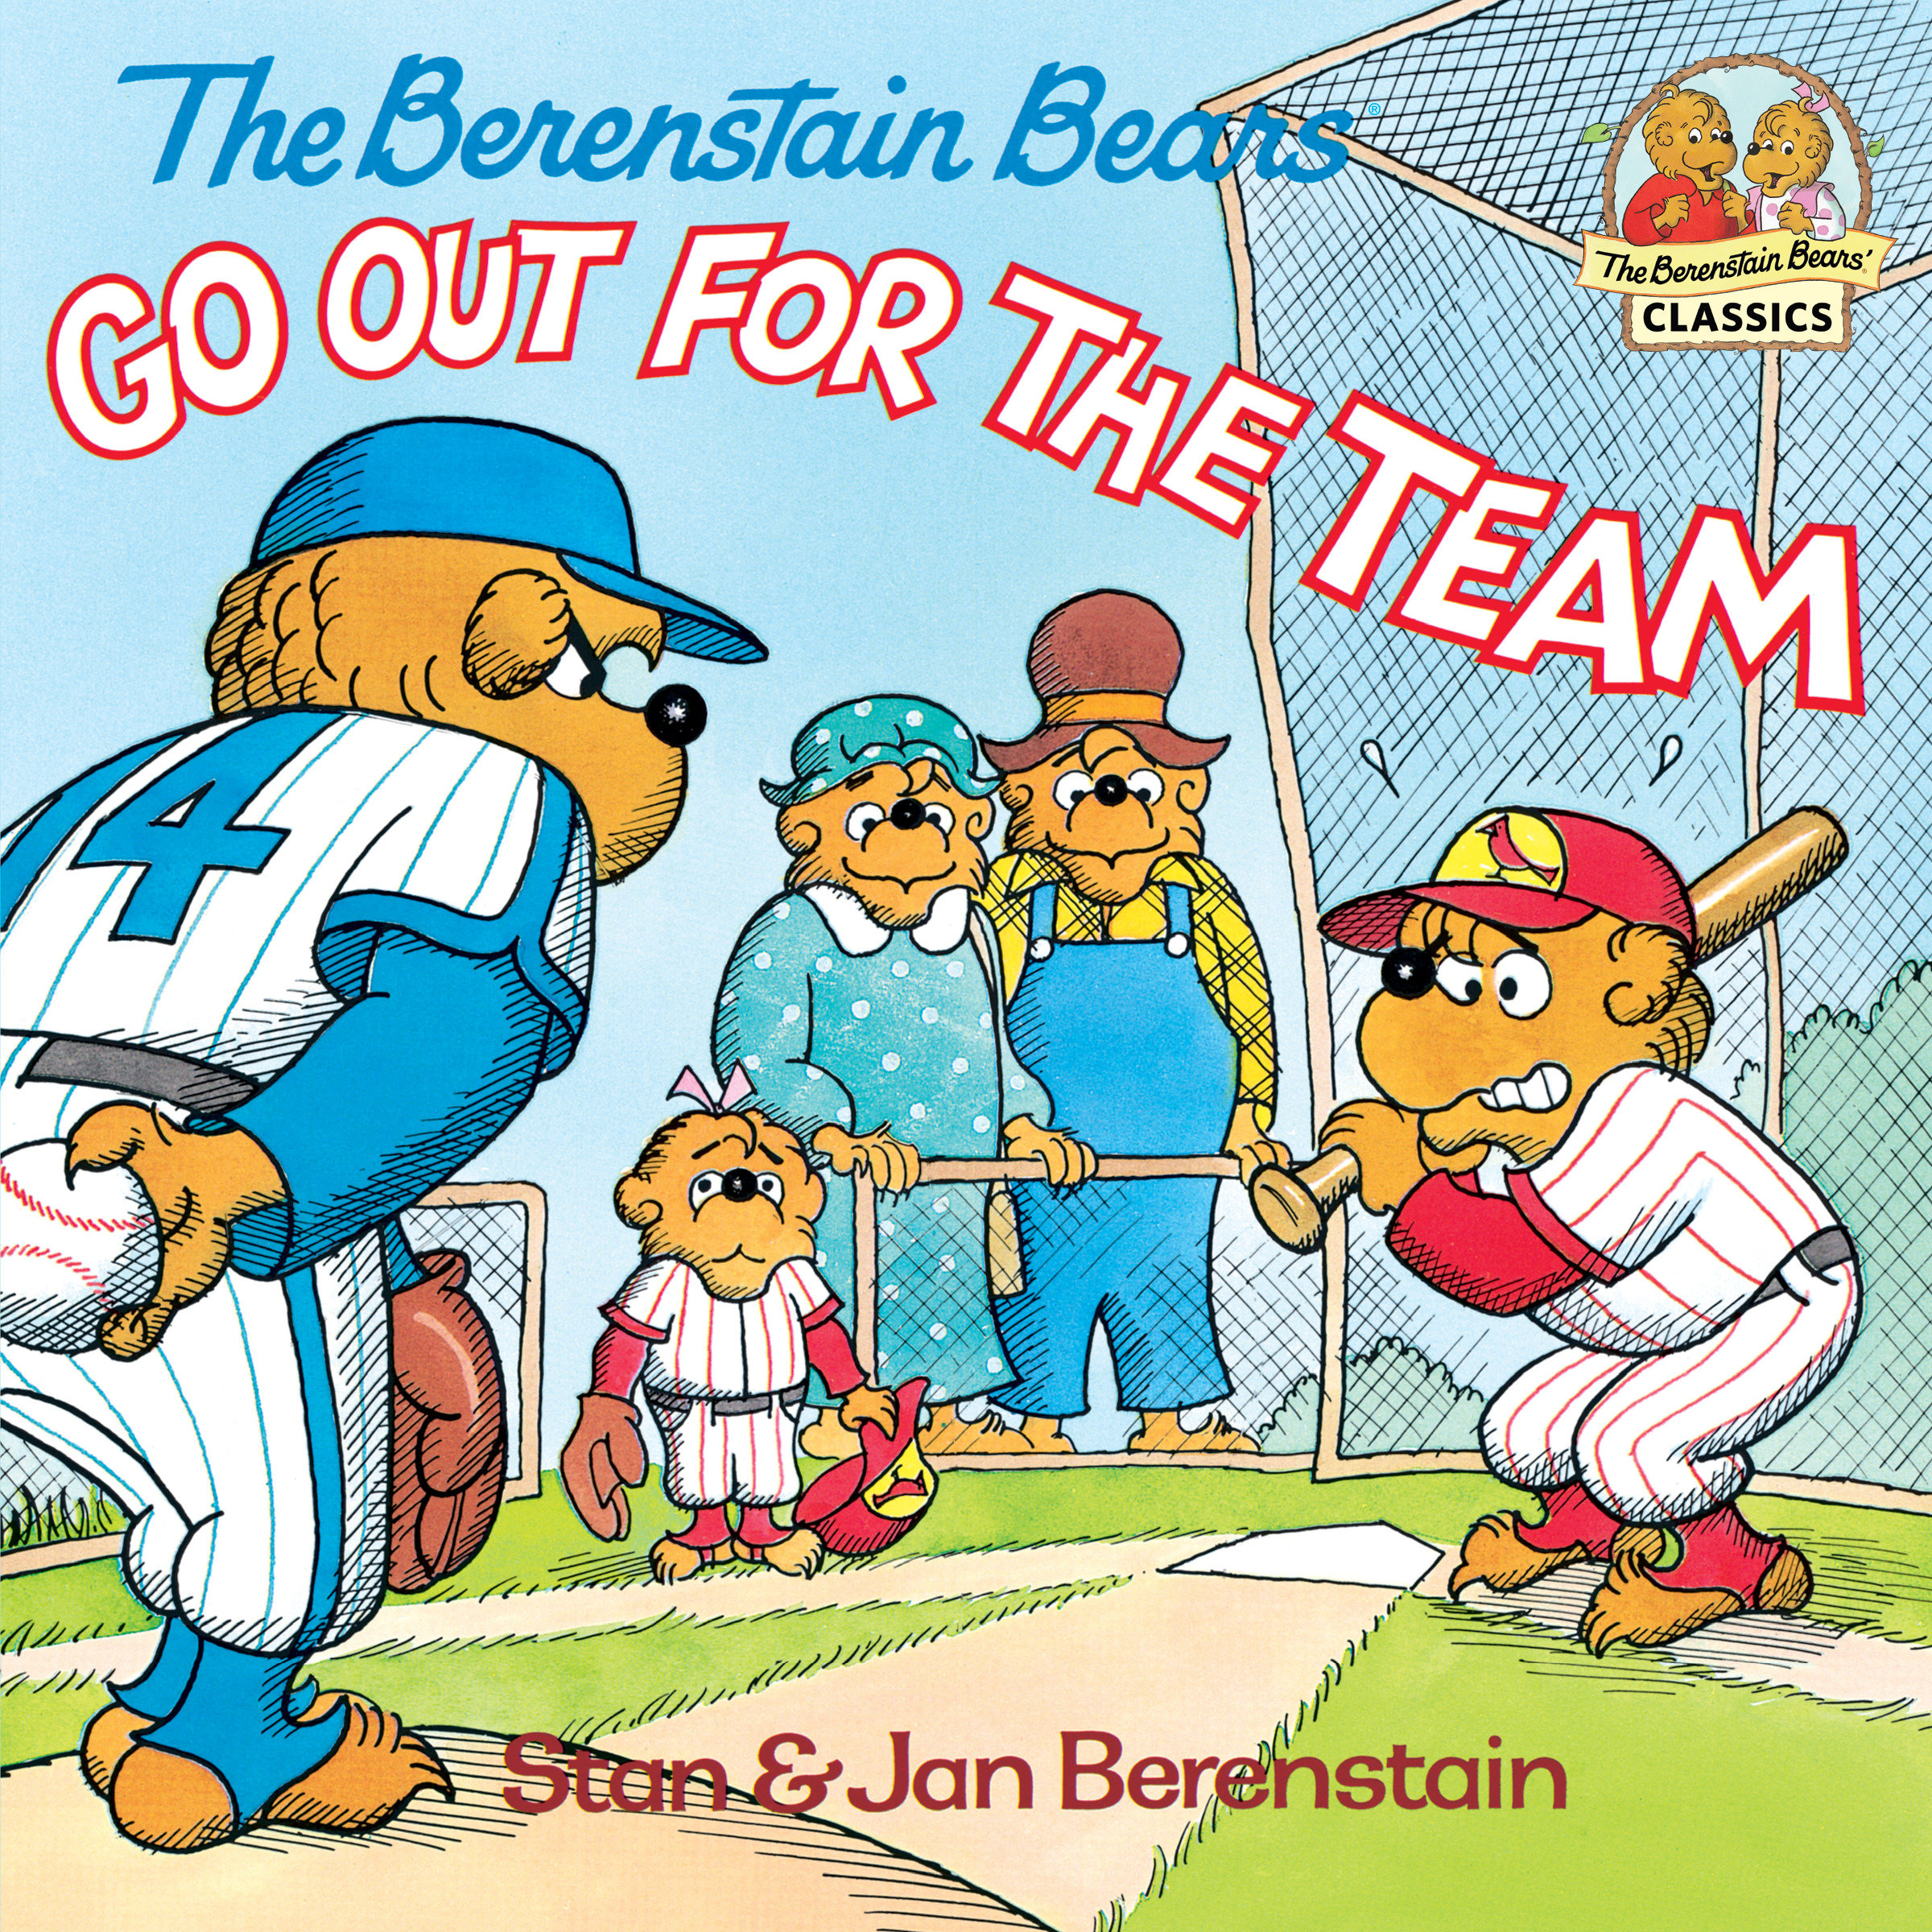 The Berenstain Bears go out for the team cover image